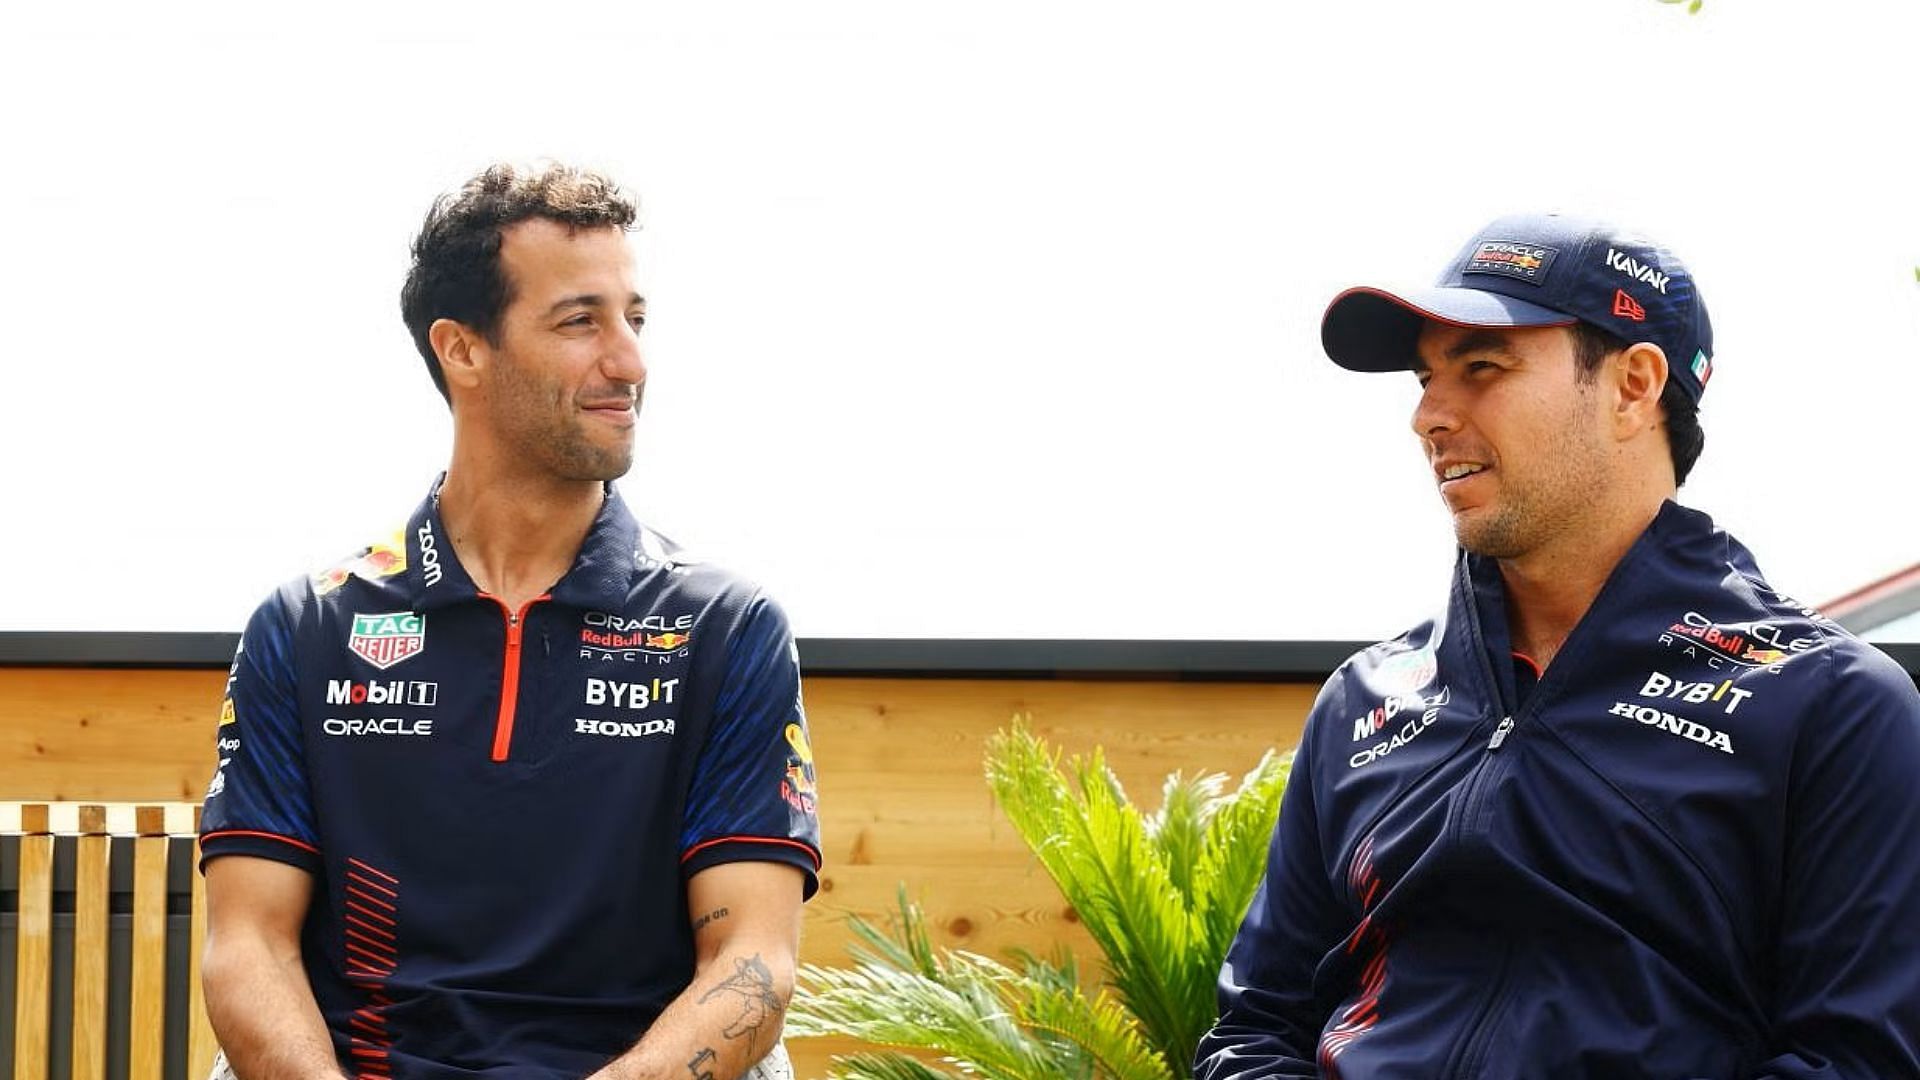 Daniel Ricciardo and Sergio Perez talk in the paddock during previews ahead of the 2023 F1 British Grand Prix. (Photo by Mark Thompson/Getty Images)